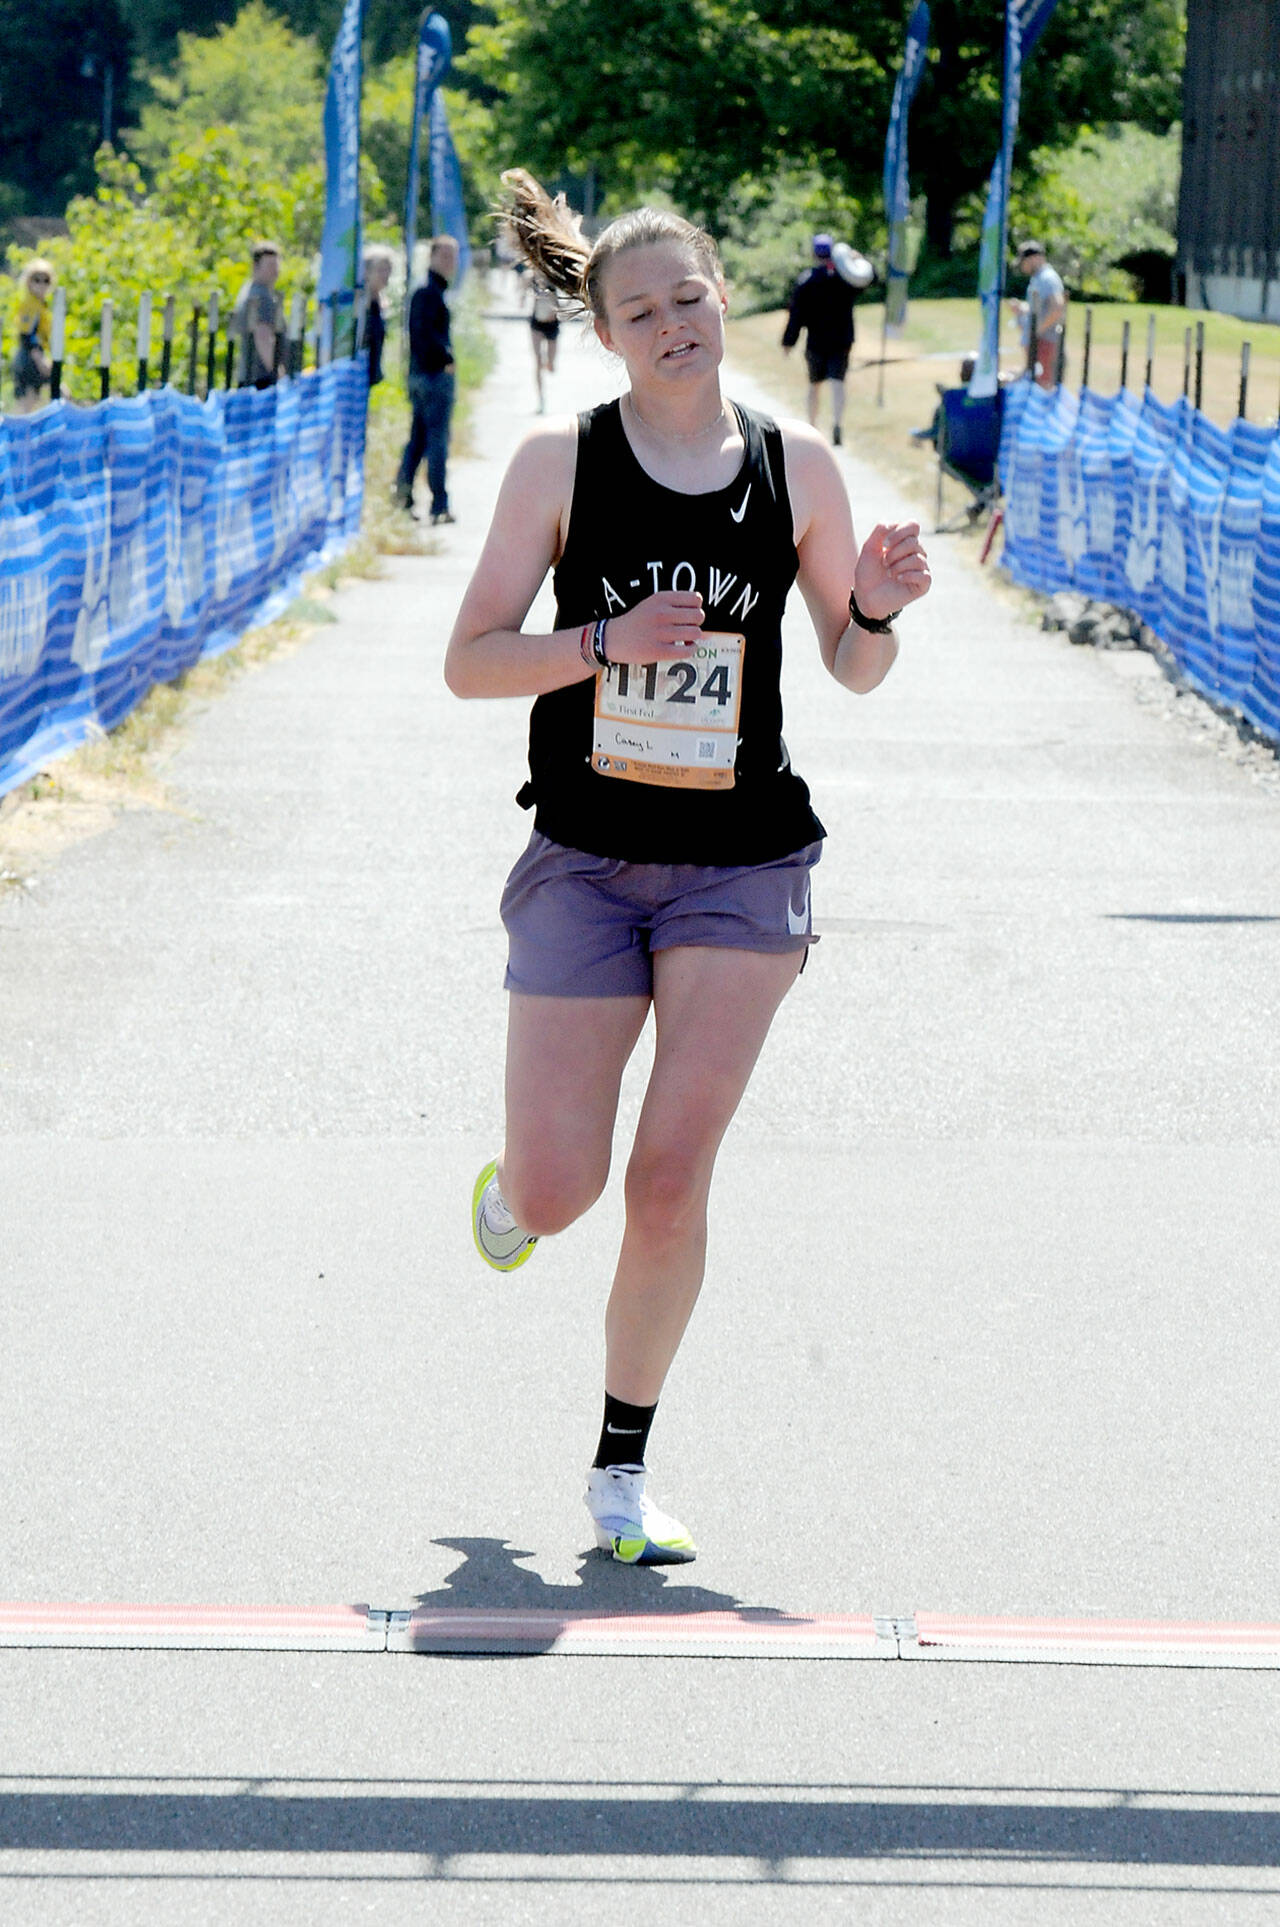 KEITH THORPE/PENINSULA DAILY NEWS Casey Lemrick of Anacortes, the top female winner of Saturday’s 5k race crosses the finish line at Port Angeles City Pier.